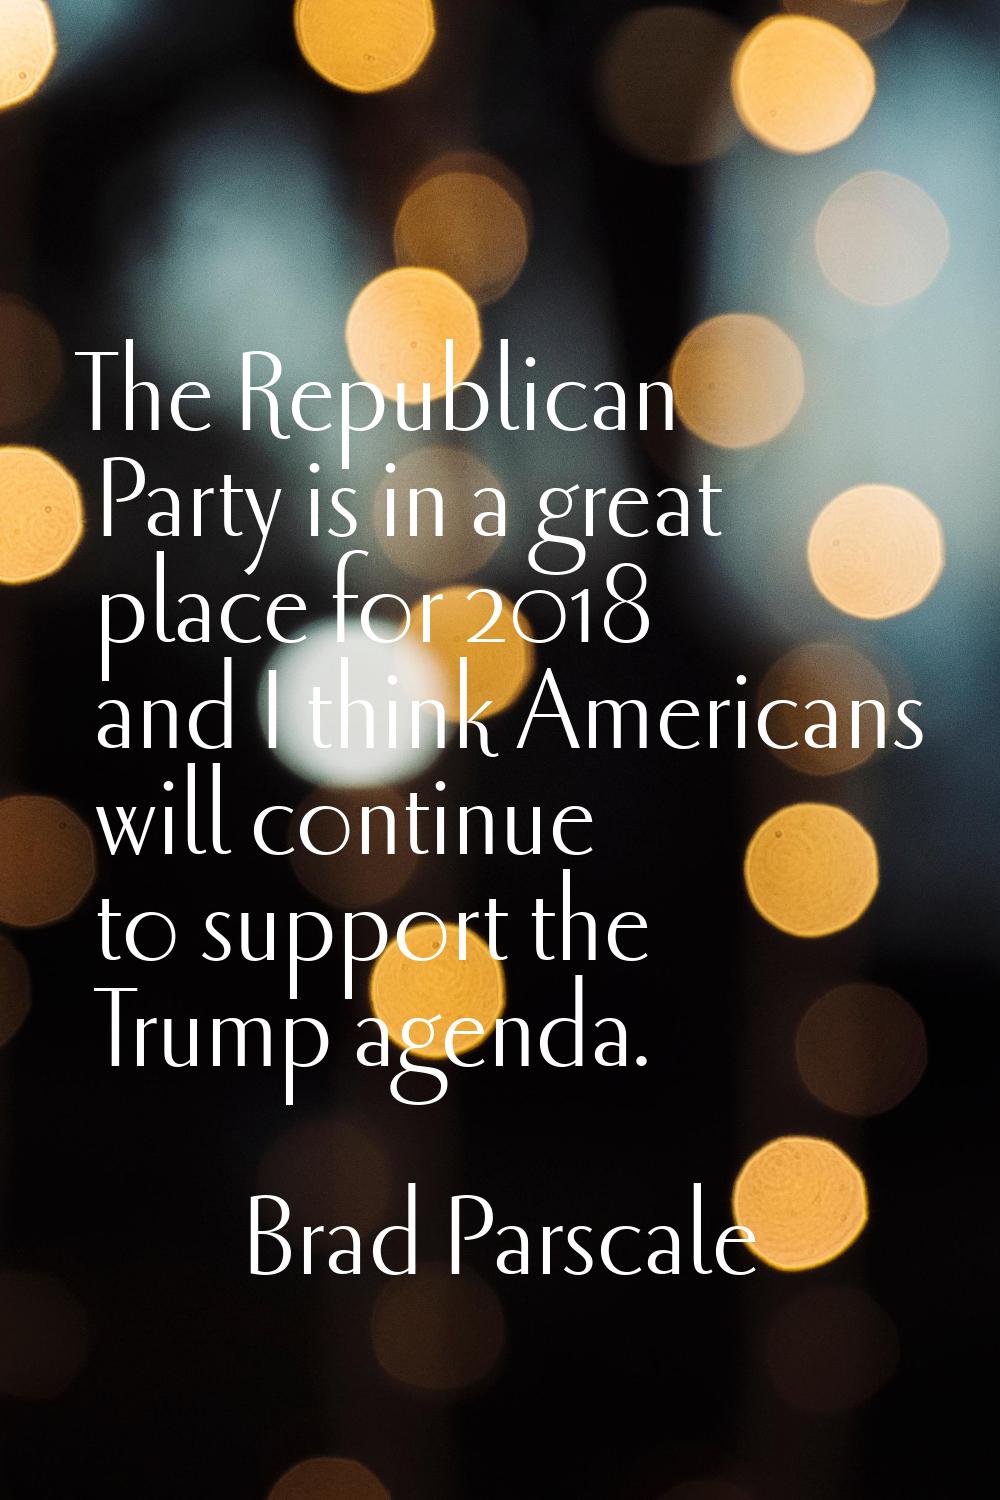 The Republican Party is in a great place for 2018 and I think Americans will continue to support th